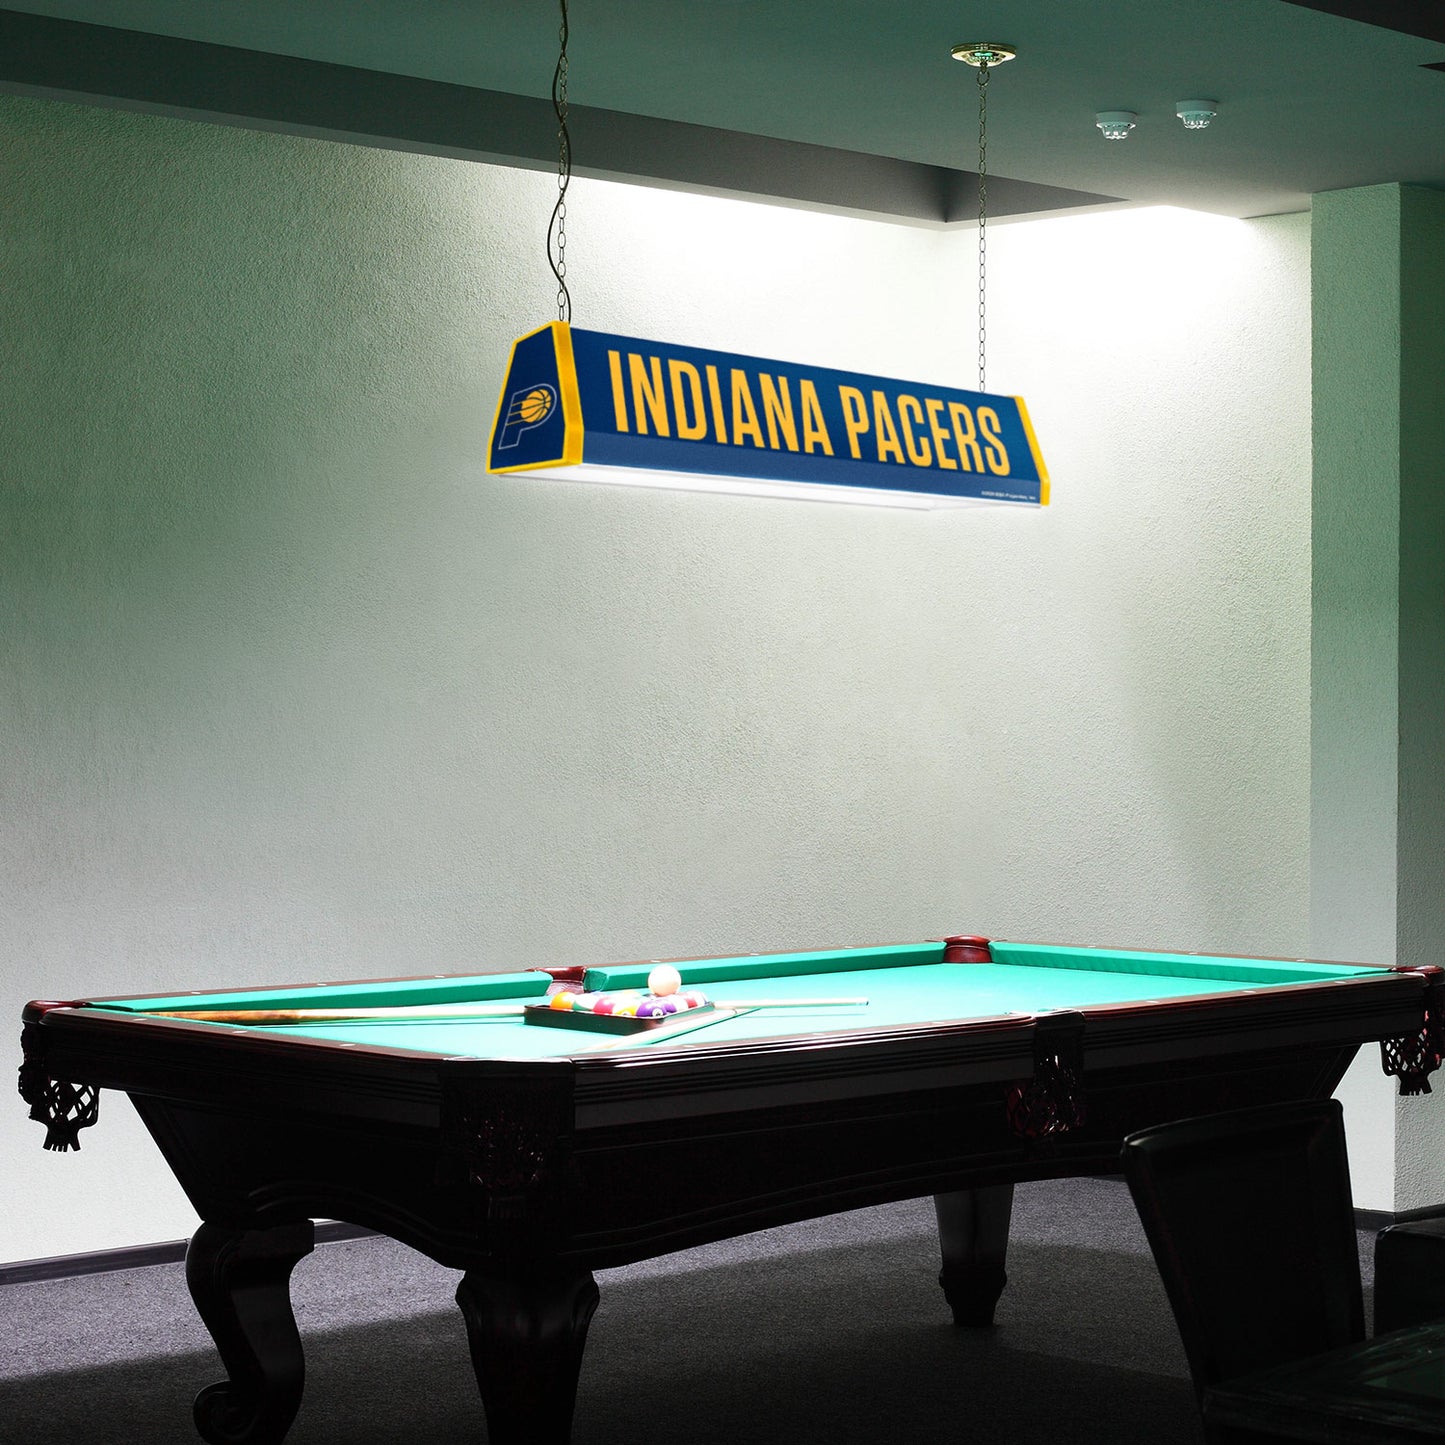 Indiana Pacers Standard Pool Table Light Room View